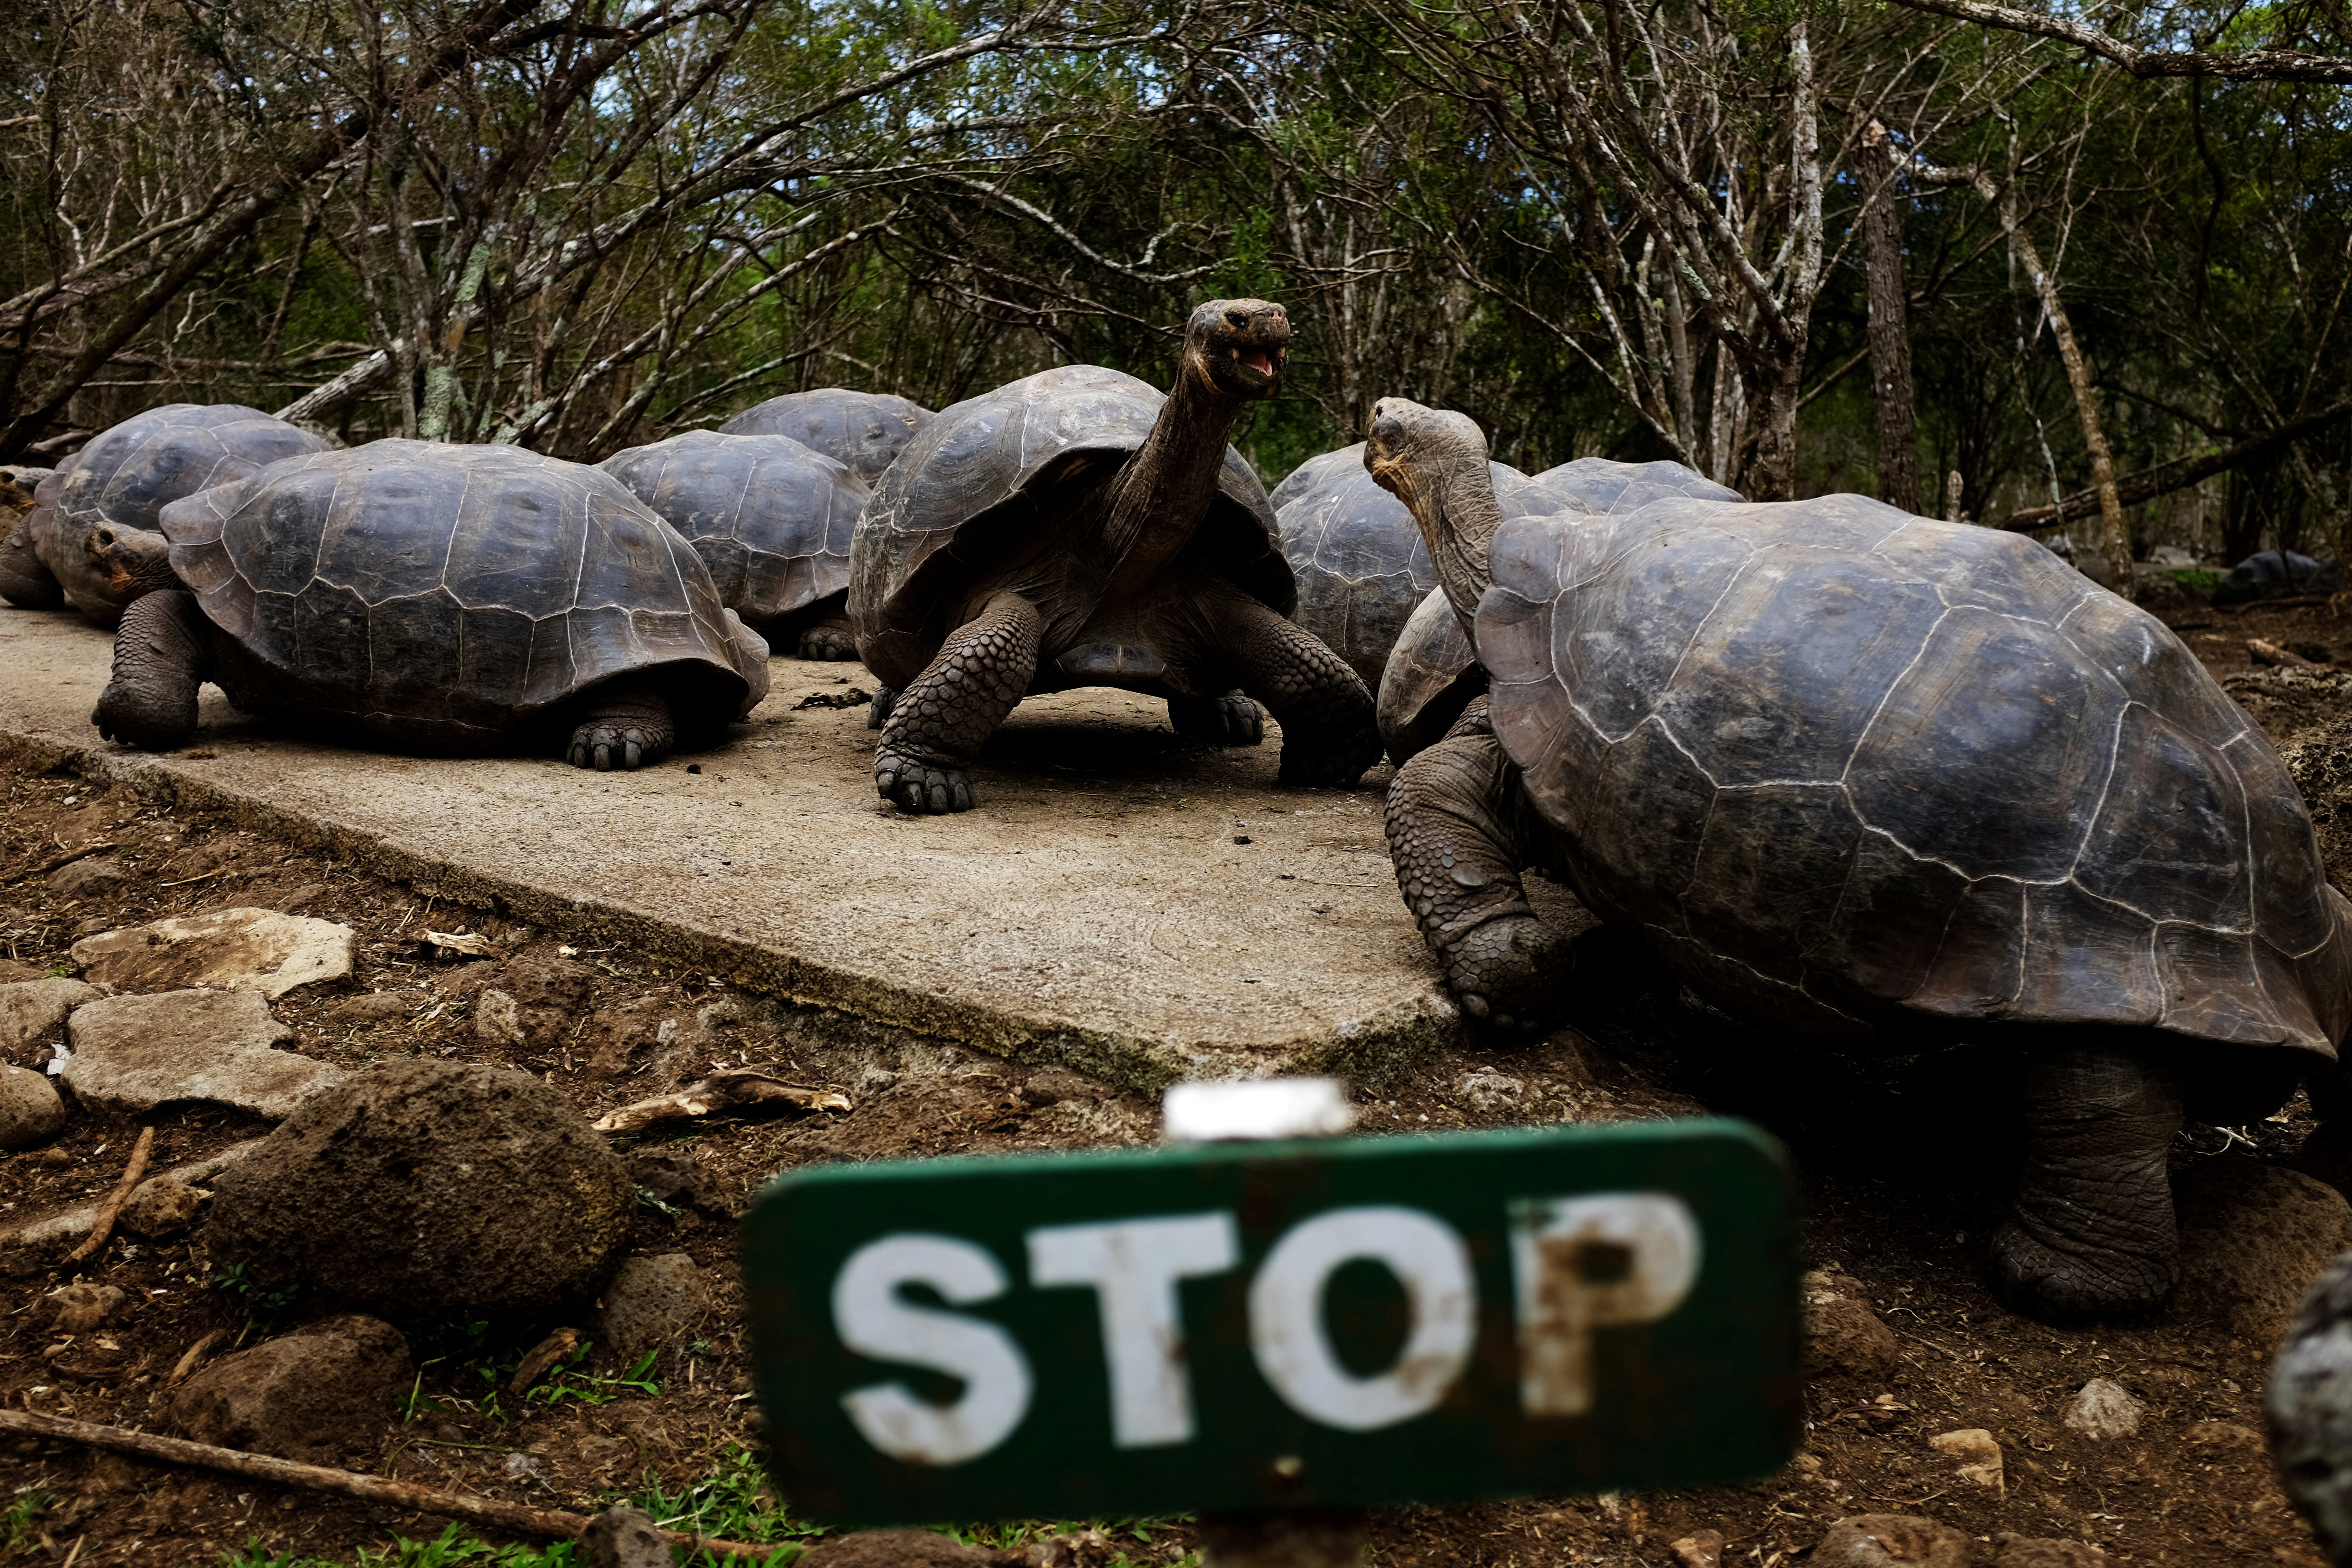 Giant tortoises are seen in Floreana Island at Galapagos National Park